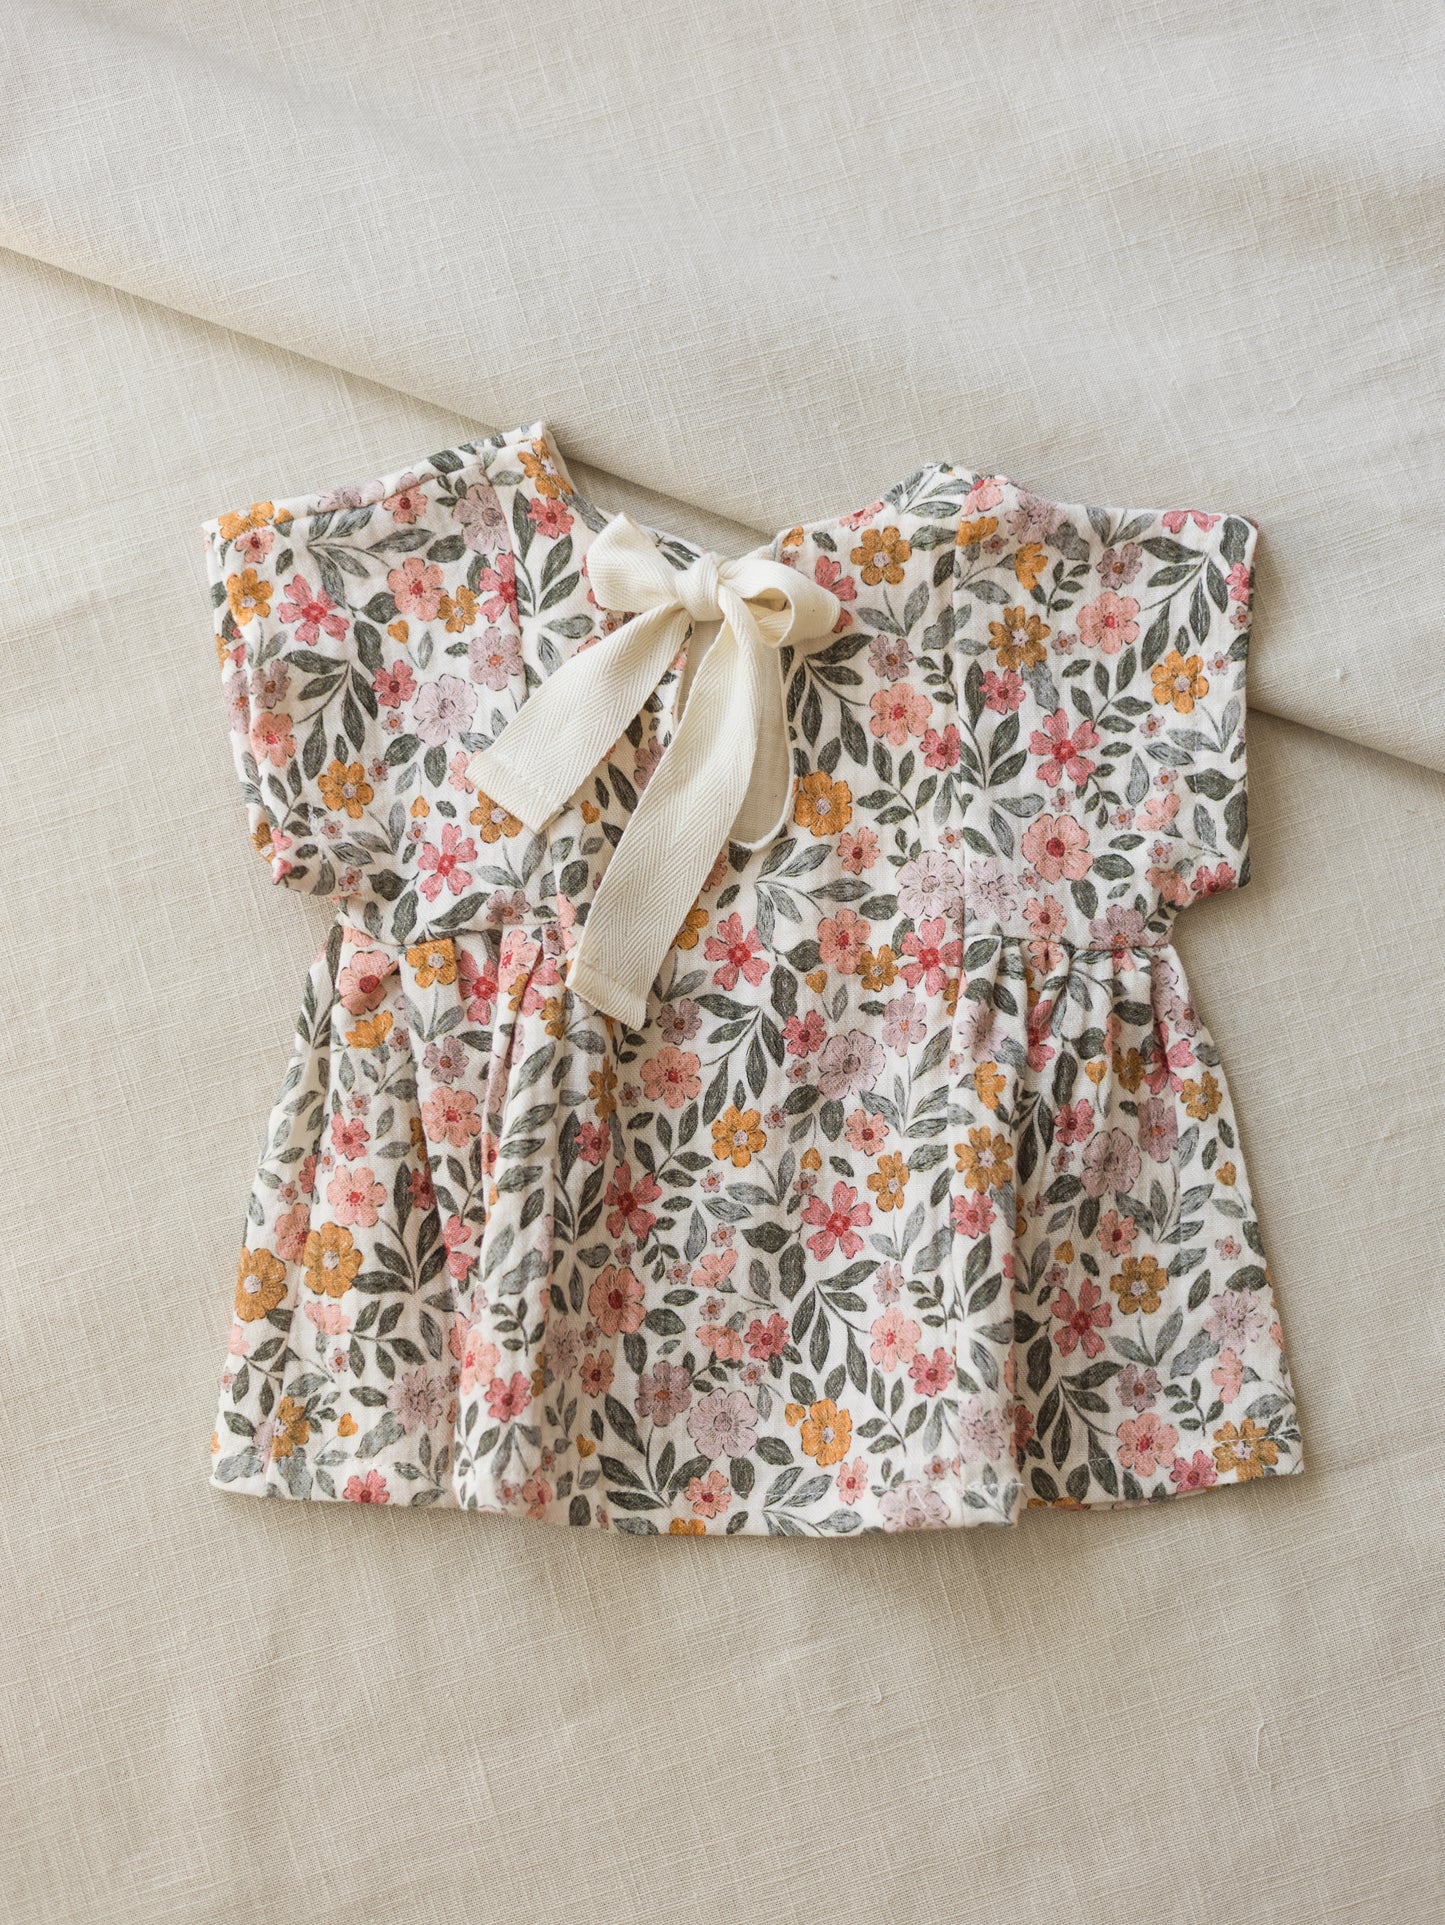 LIMITED EDITION * Malia baby dress / colorful flowers - rose